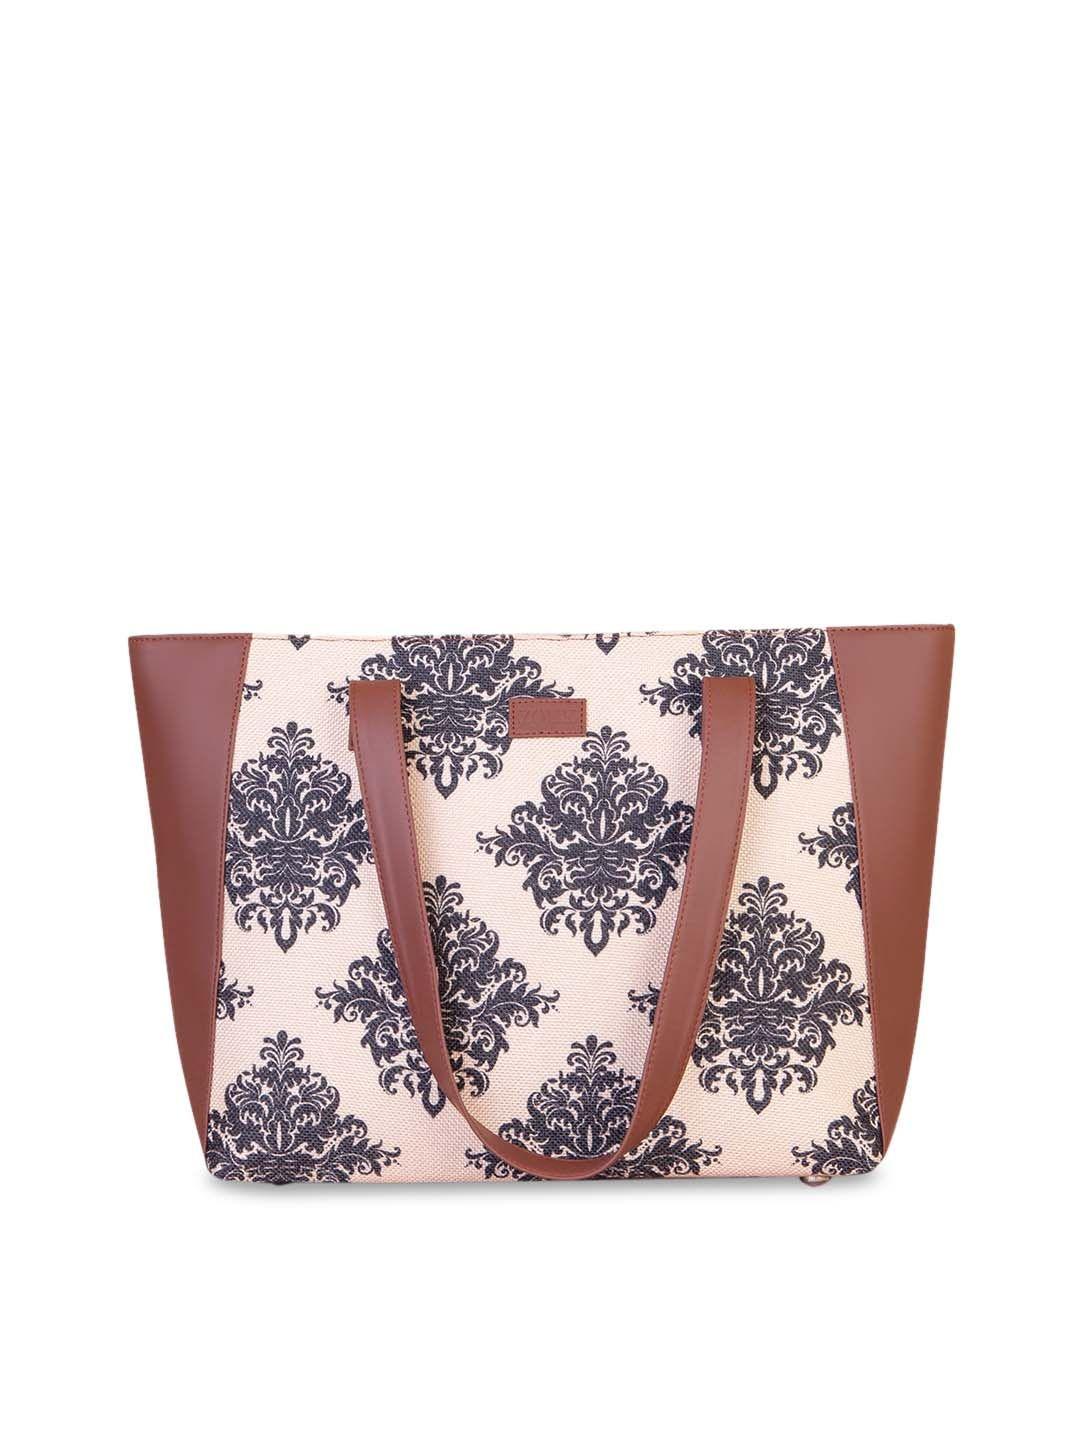 zouk peach-coloured floral printed structured tote bag